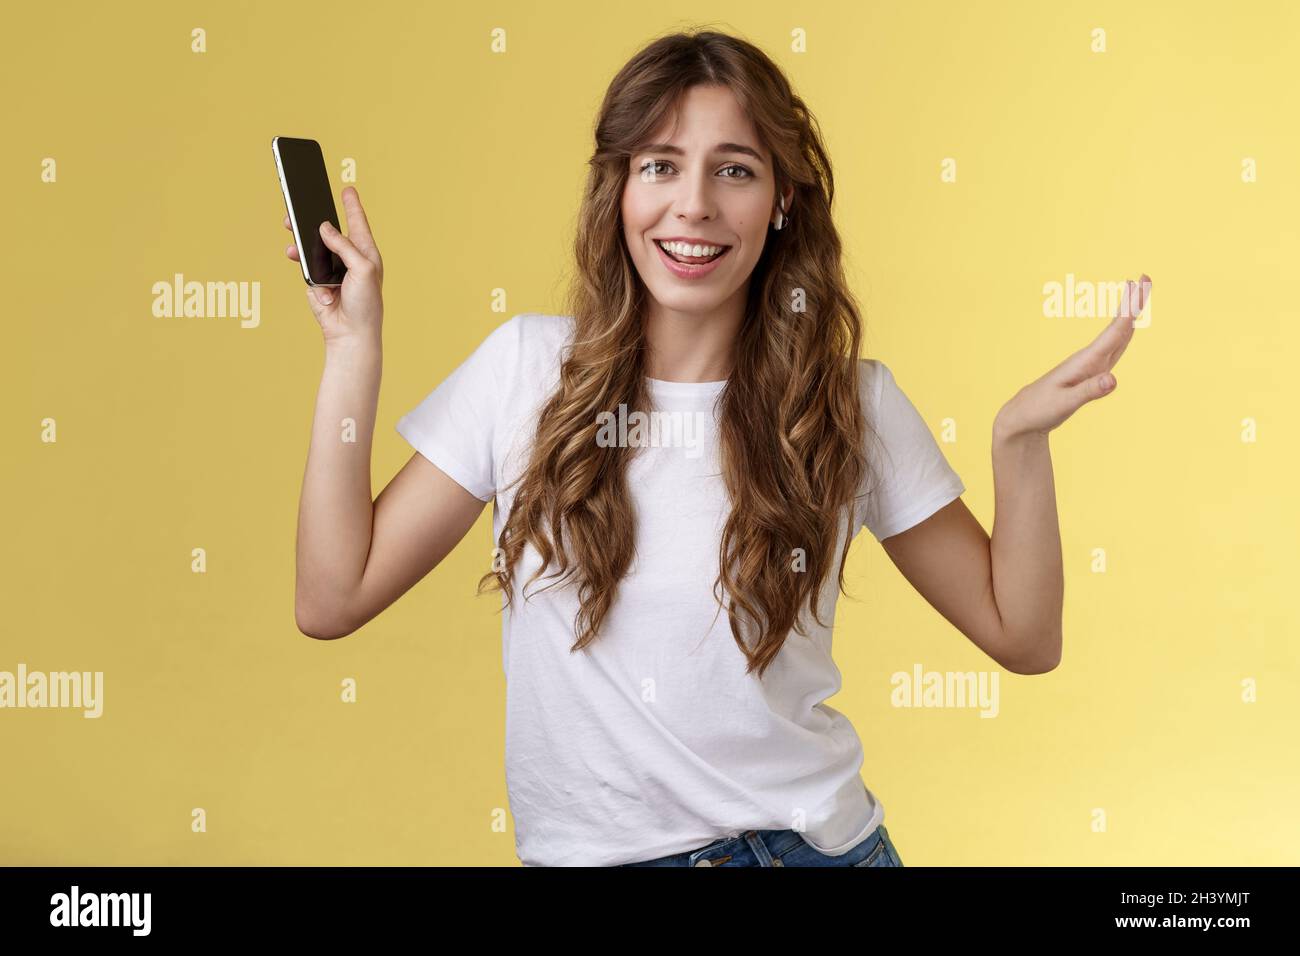 Carefree good-looking lively sociable curly-haired girl having fun wearing wireless earbuds dancing joyfully listening music mov Stock Photo